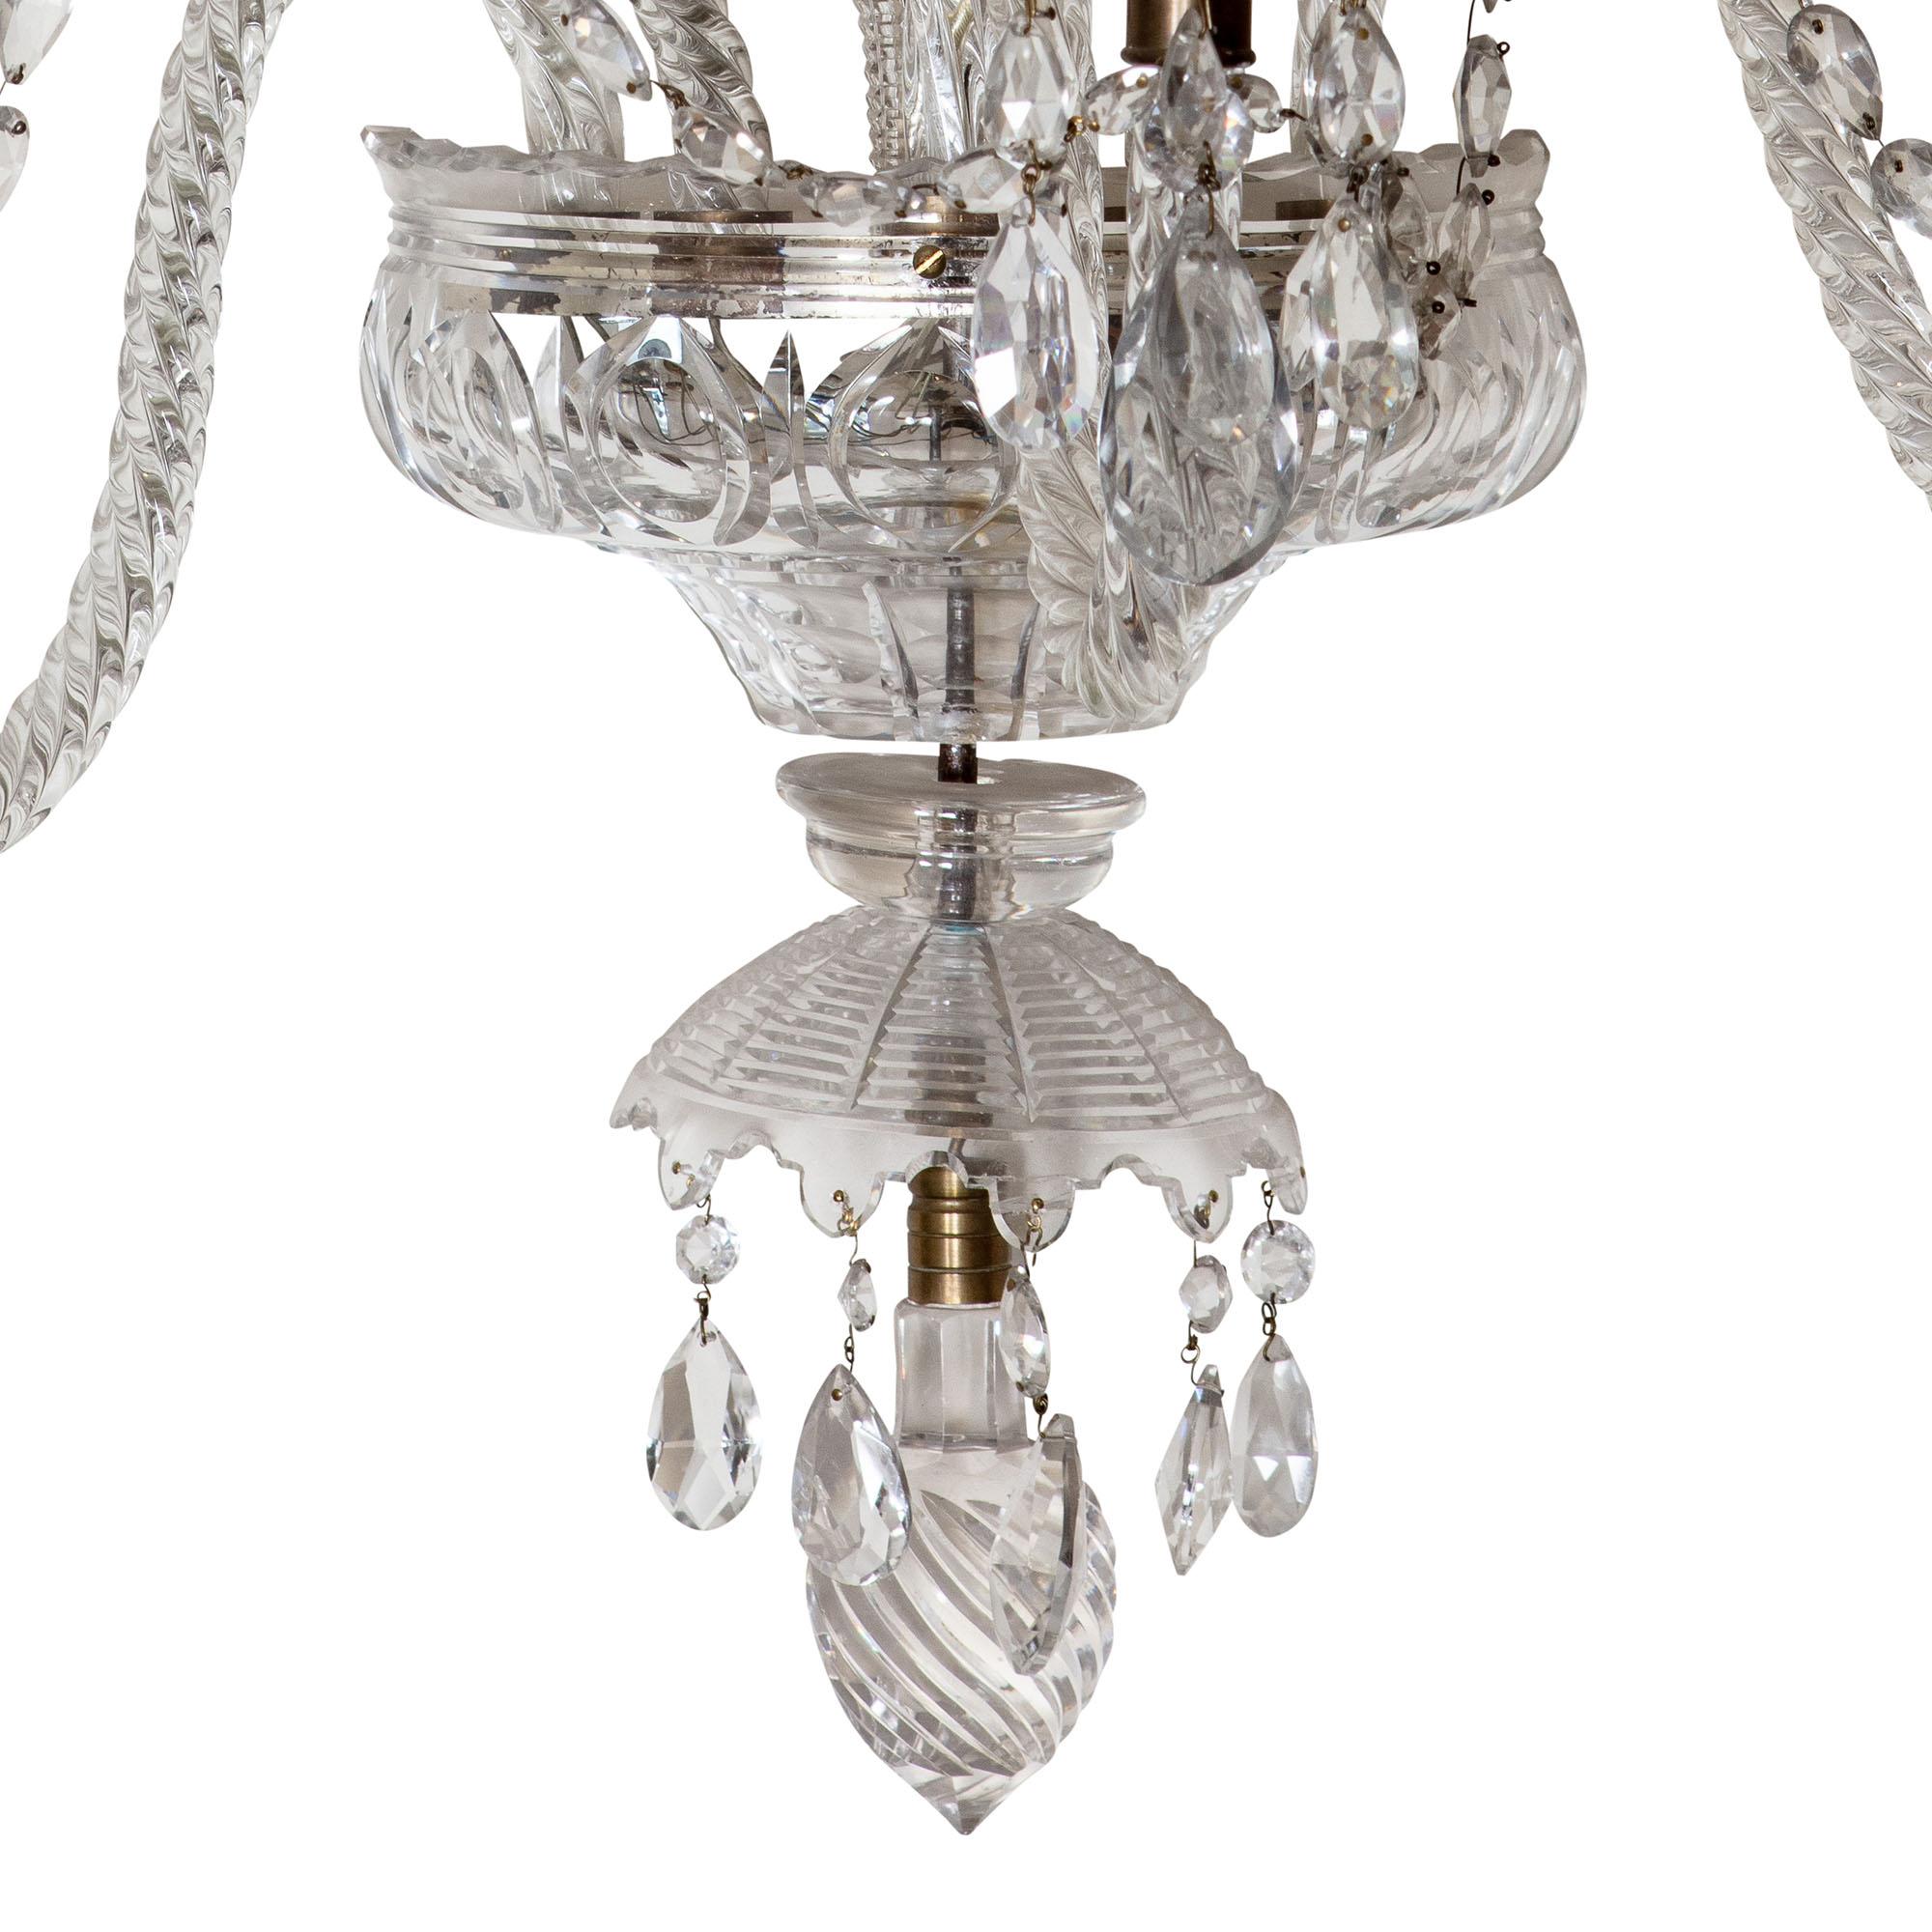 A rare set of 8 Palatial 19th century cut glass wall lights, each with five-light in two tiers. Eight pointed stars surmount scrolled coronas hung with cut pear drops, five arms issue from a central receiving plate with Van Dyck drip pans, and